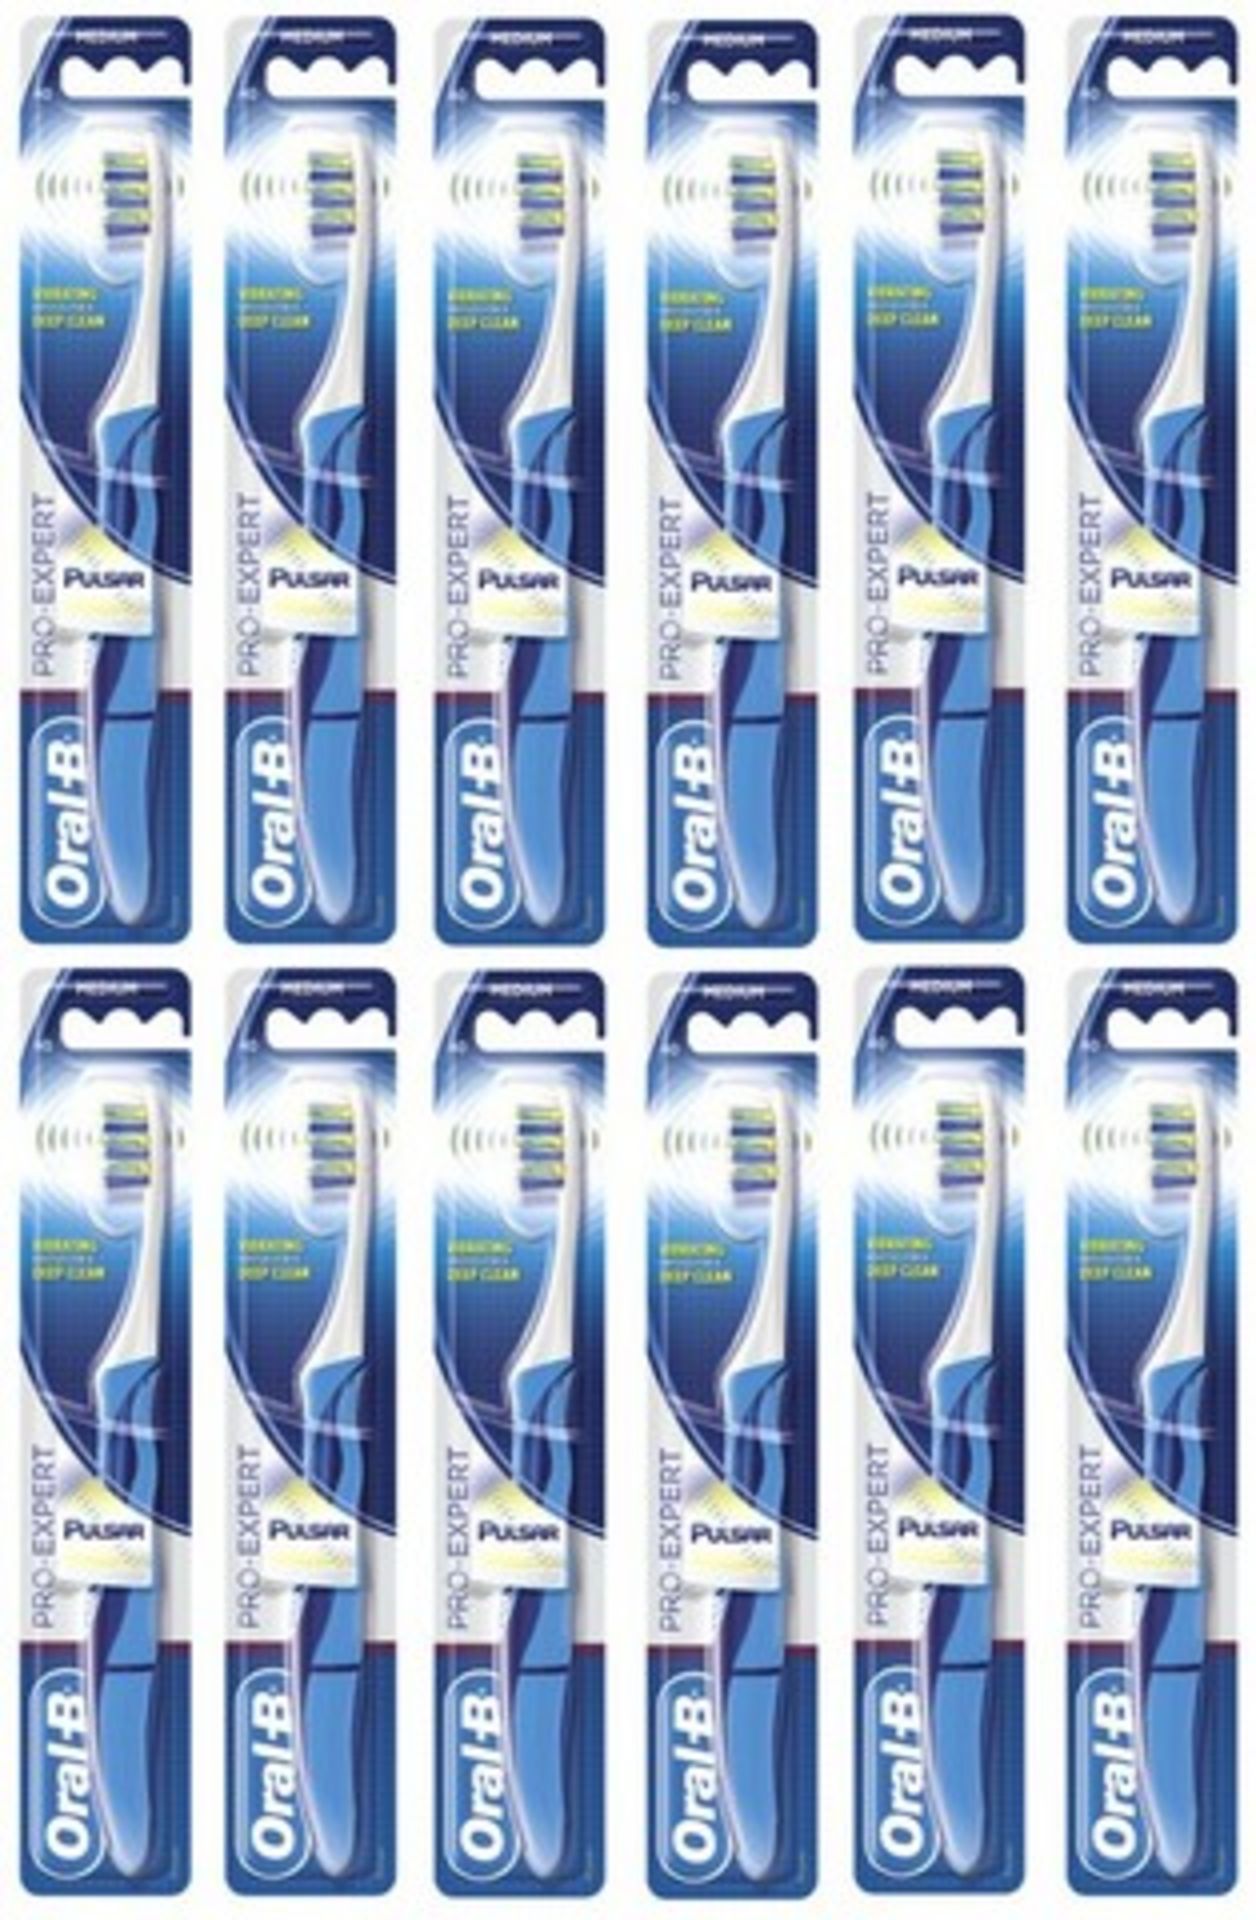 V Brand New Box of 12 Oral-B Electric Pulsar Pro Expert Toothbrushes - Online Price £75.00 (